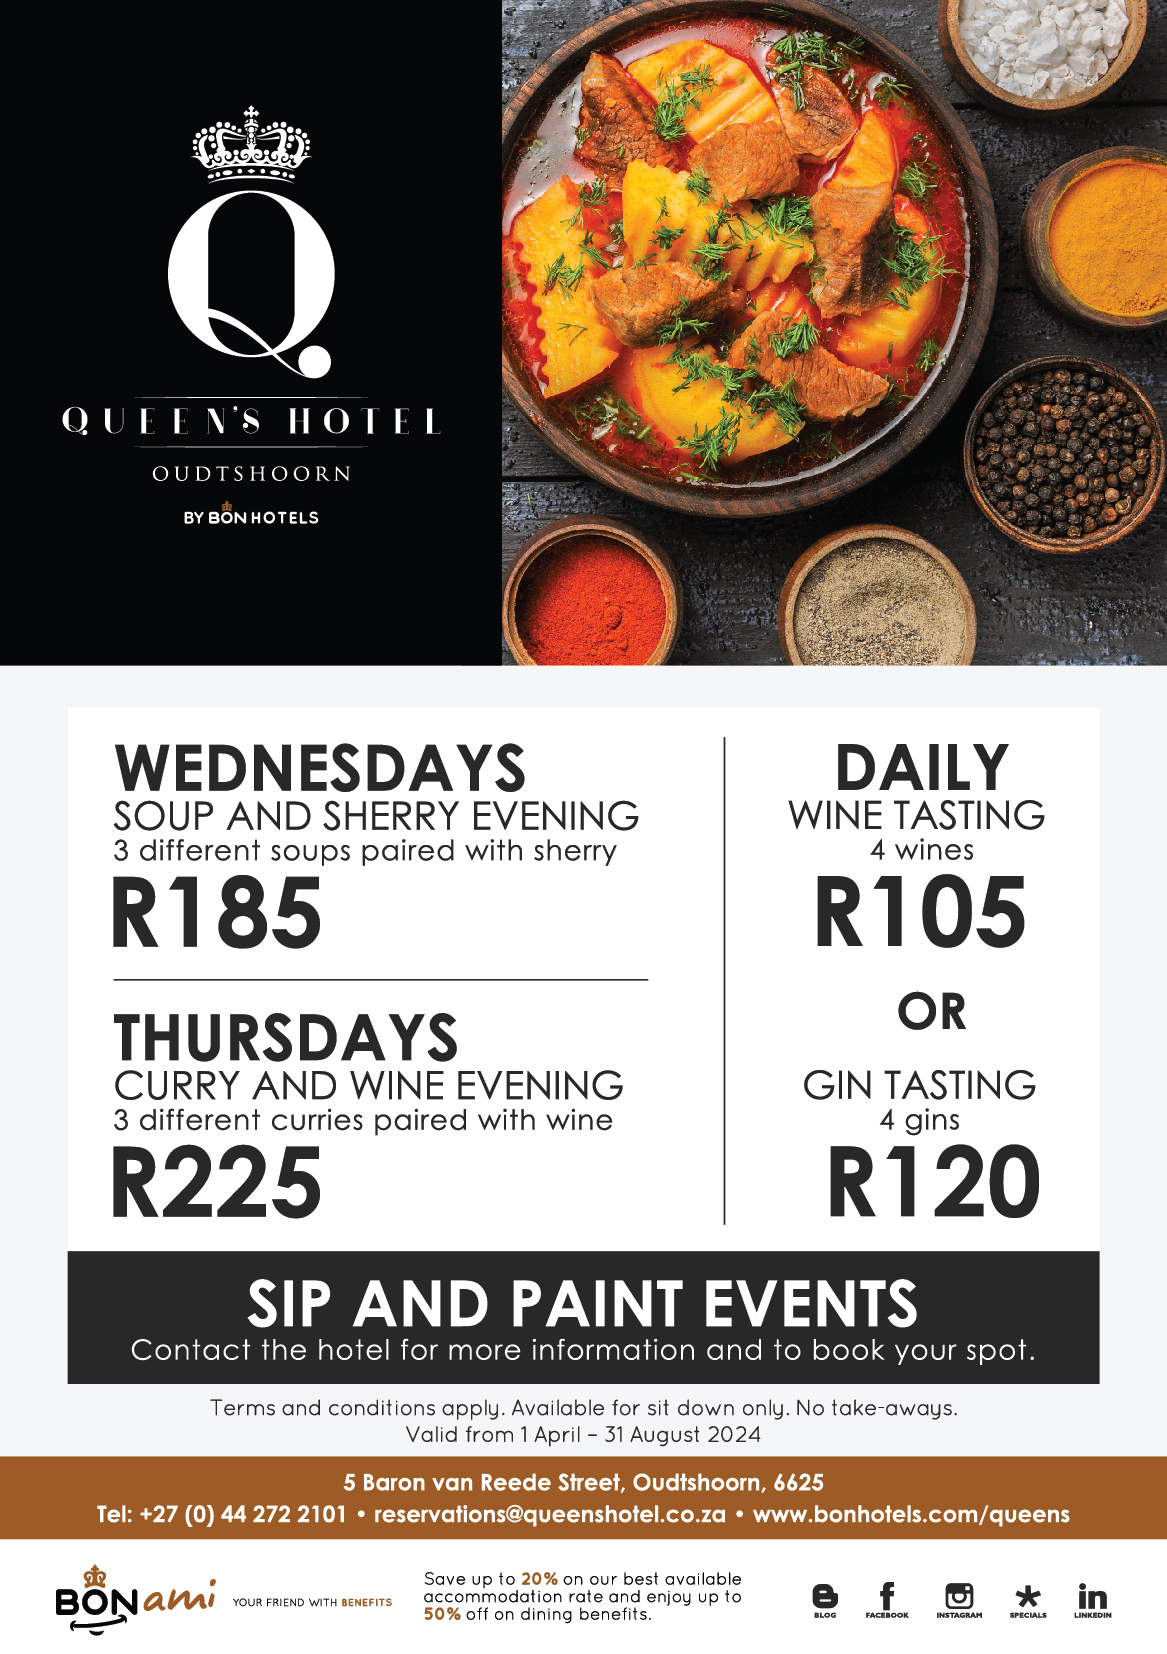 BON Appetits | Promotions at Queen’s Hotel by BON Hotels | From Feast to Fiesta: We've Got Your Food and Beverage Needs Covered 